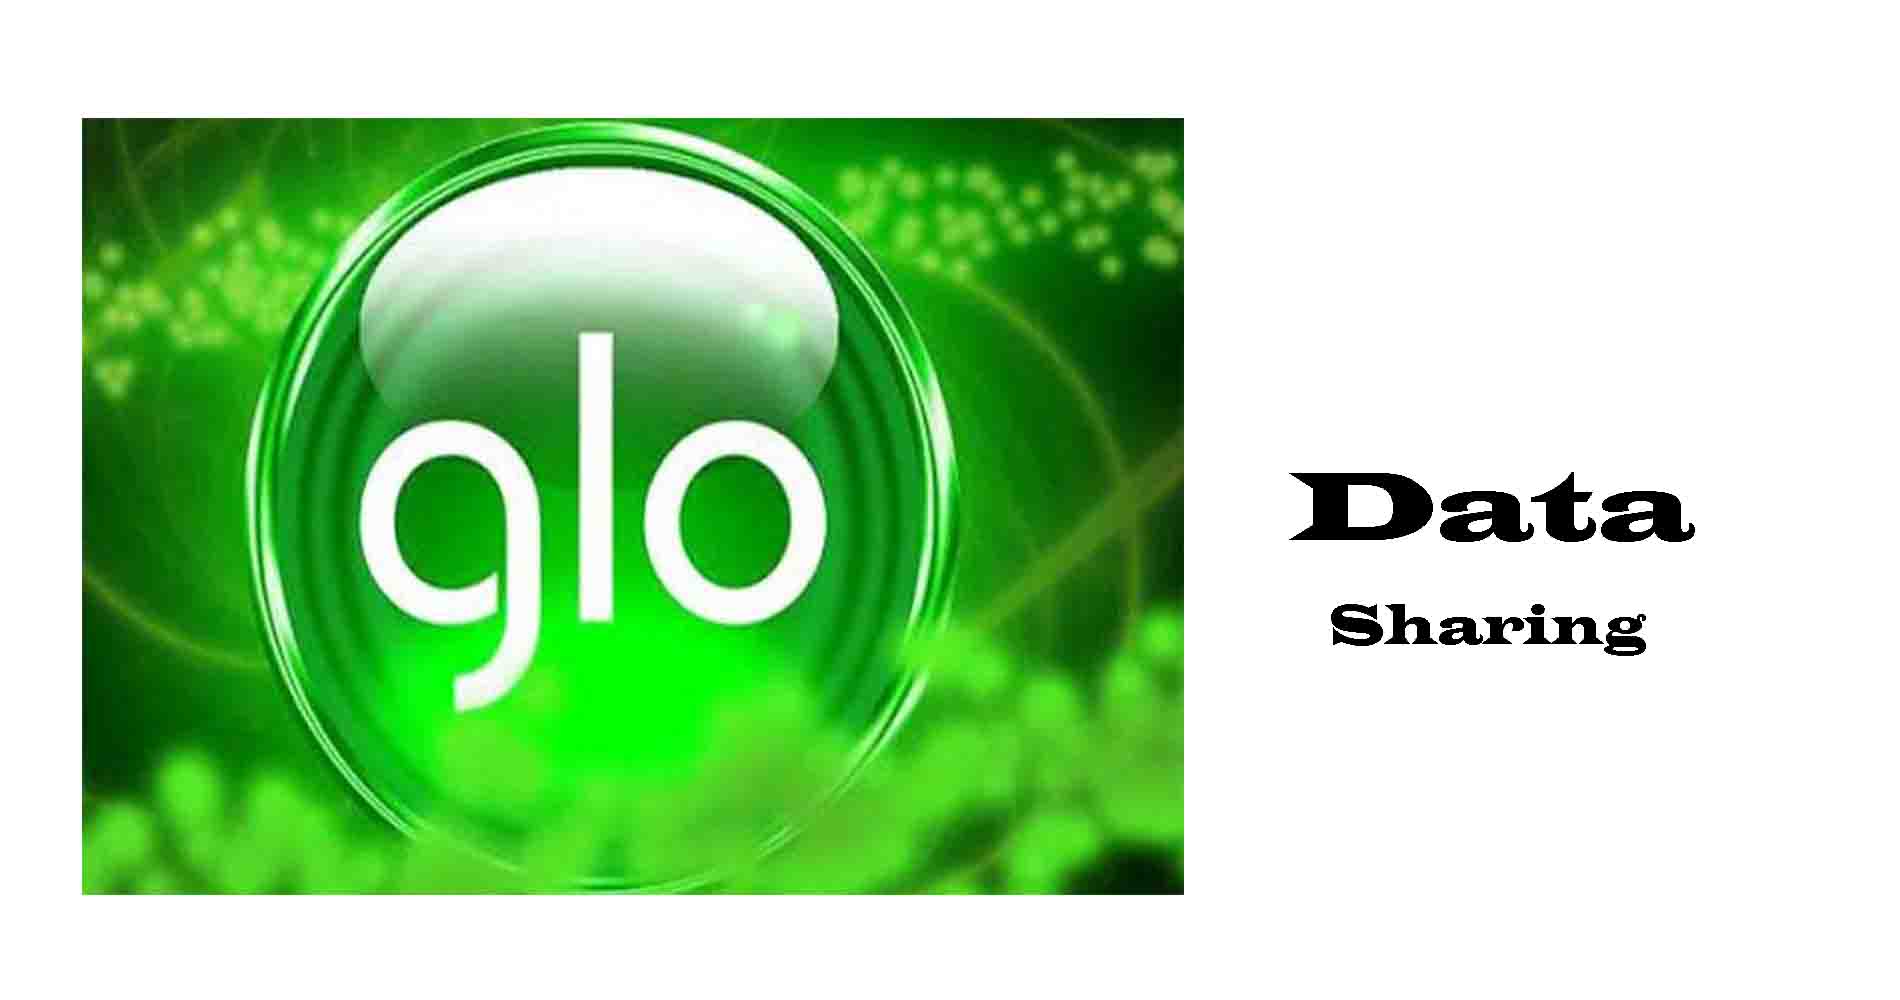 How to share glo data